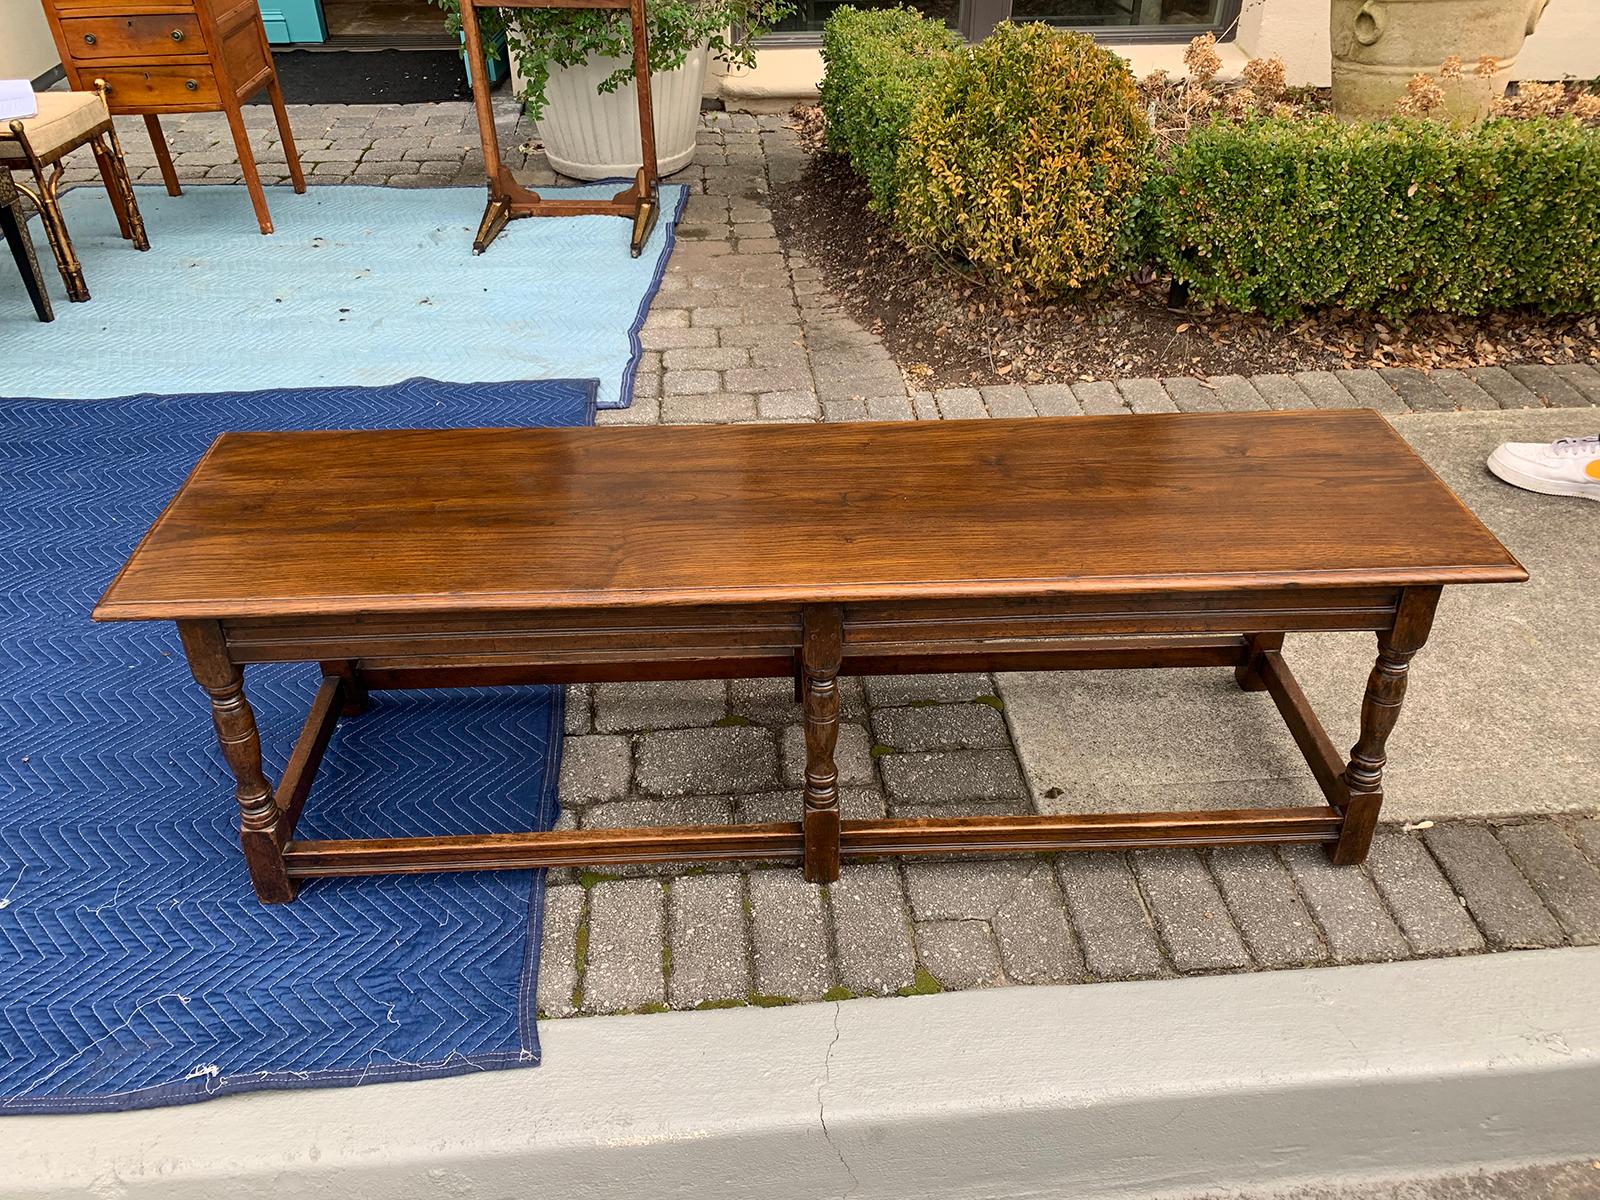 Long English Wood Coffee Table or Joint Stool Bench, circa 1900s-1930s 2